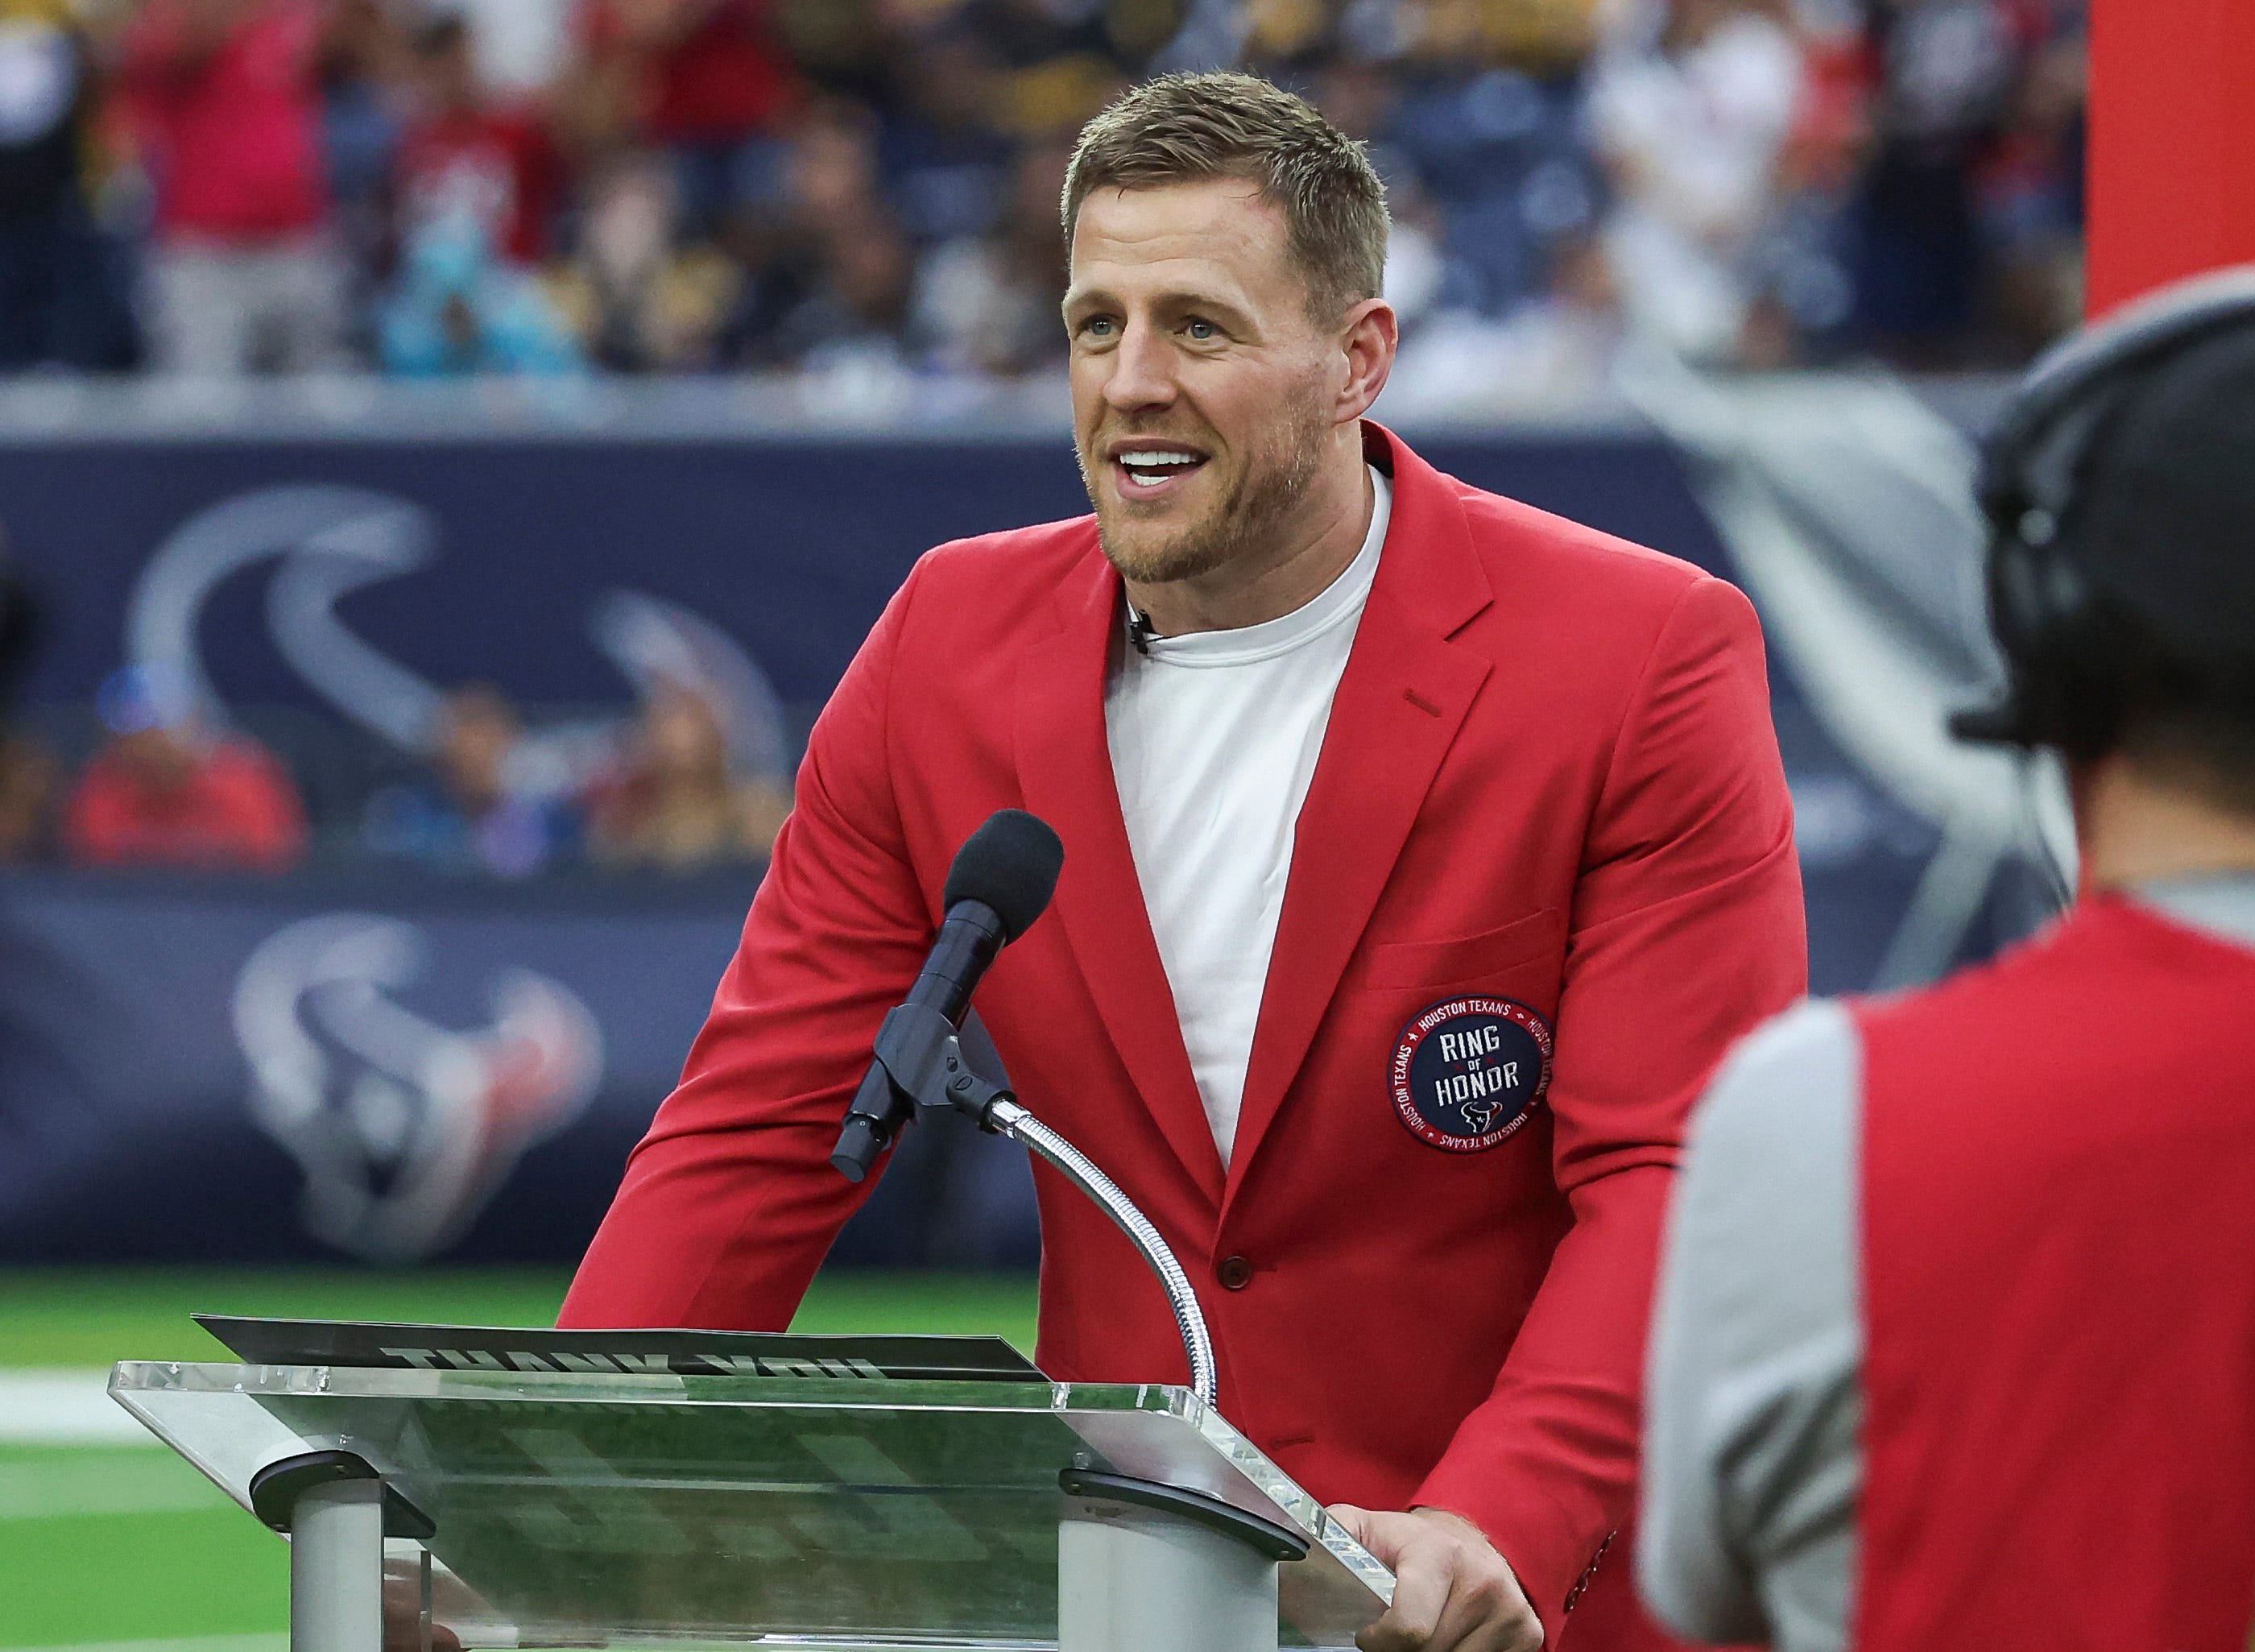 j.j. watt says he'd come out of retirement to play again if texans 'absolutely need it'